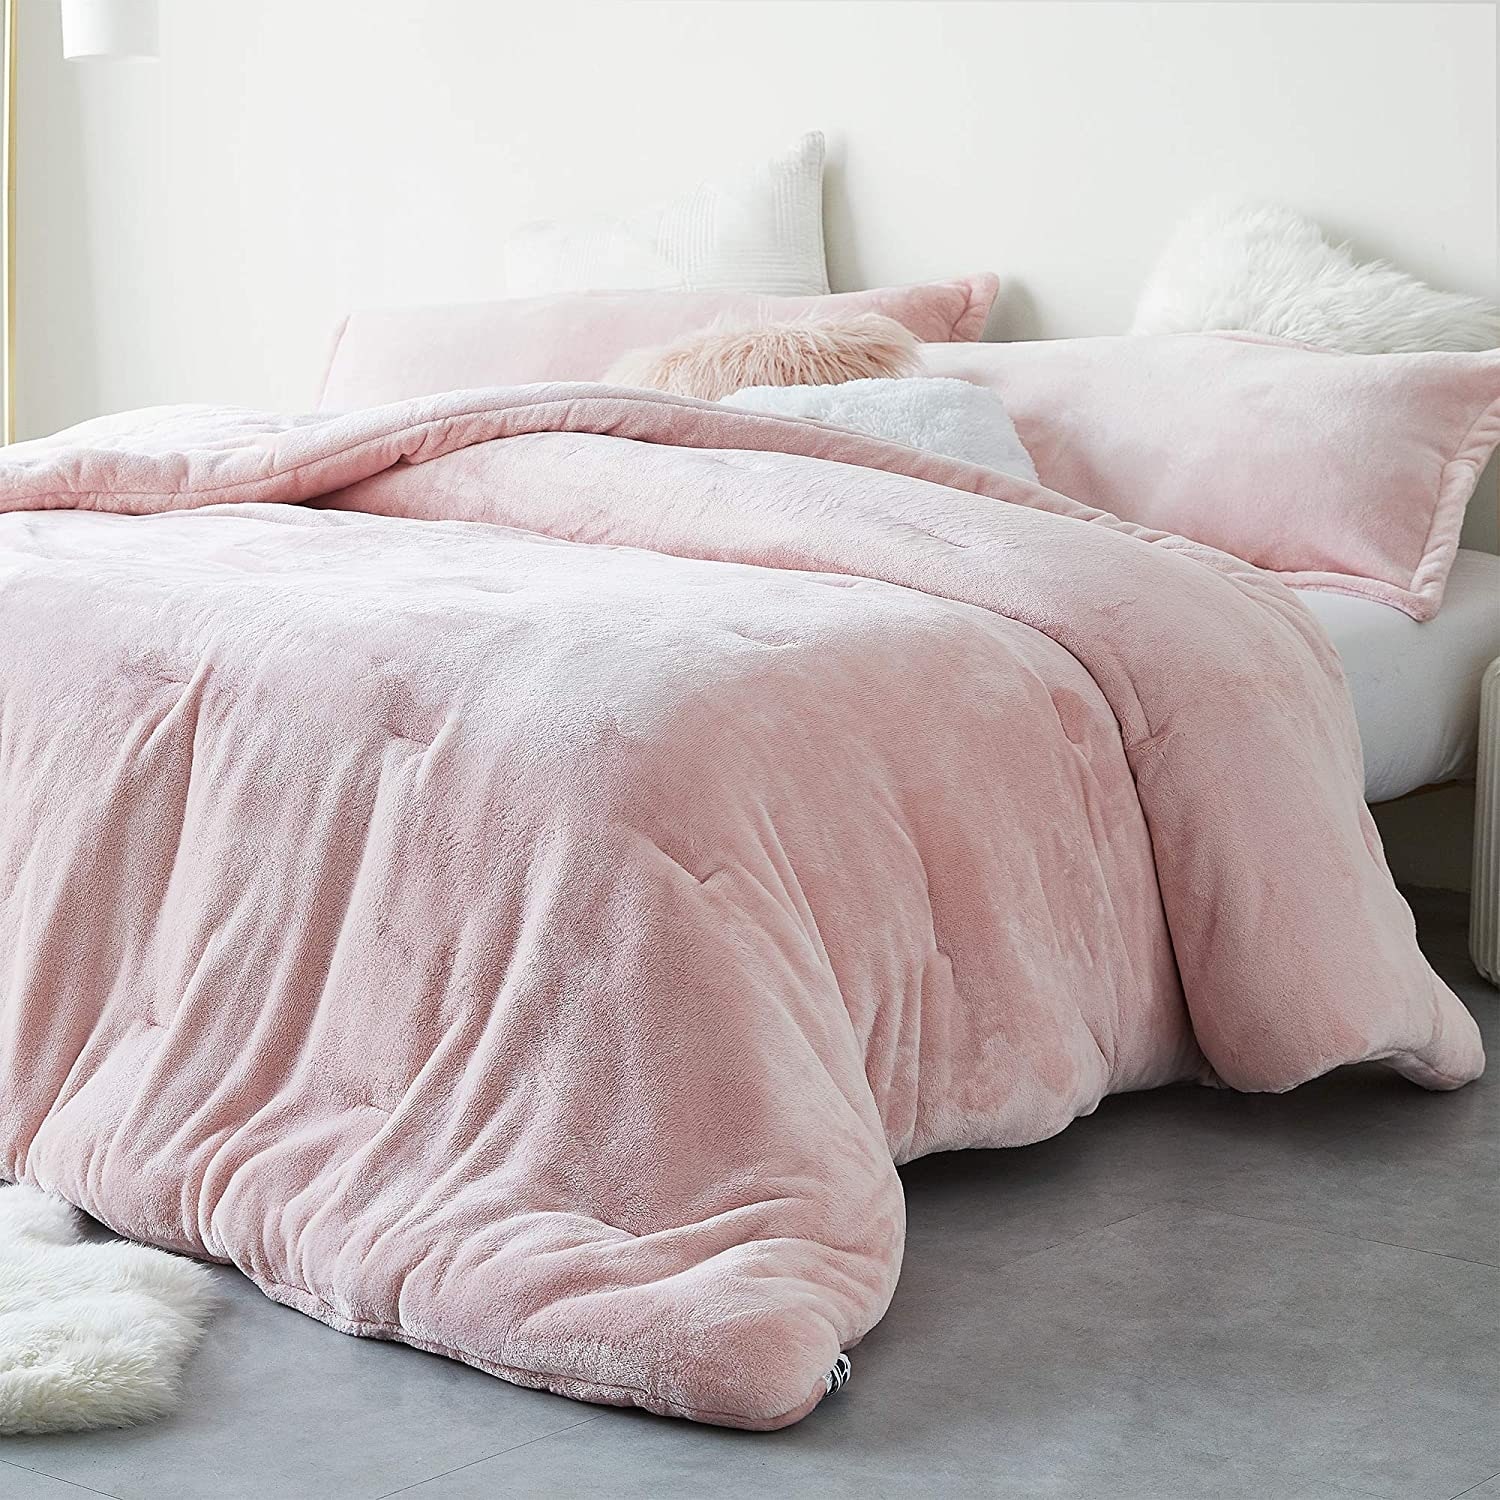 https://ak1.ostkcdn.com/images/products/is/images/direct/2a8043b447a4e097fdcc7099fef8f735c8705d24/Coma-Inducer-Oversized-Comforter---Me-Sooo-Comfy---Rose-Quartz.jpg